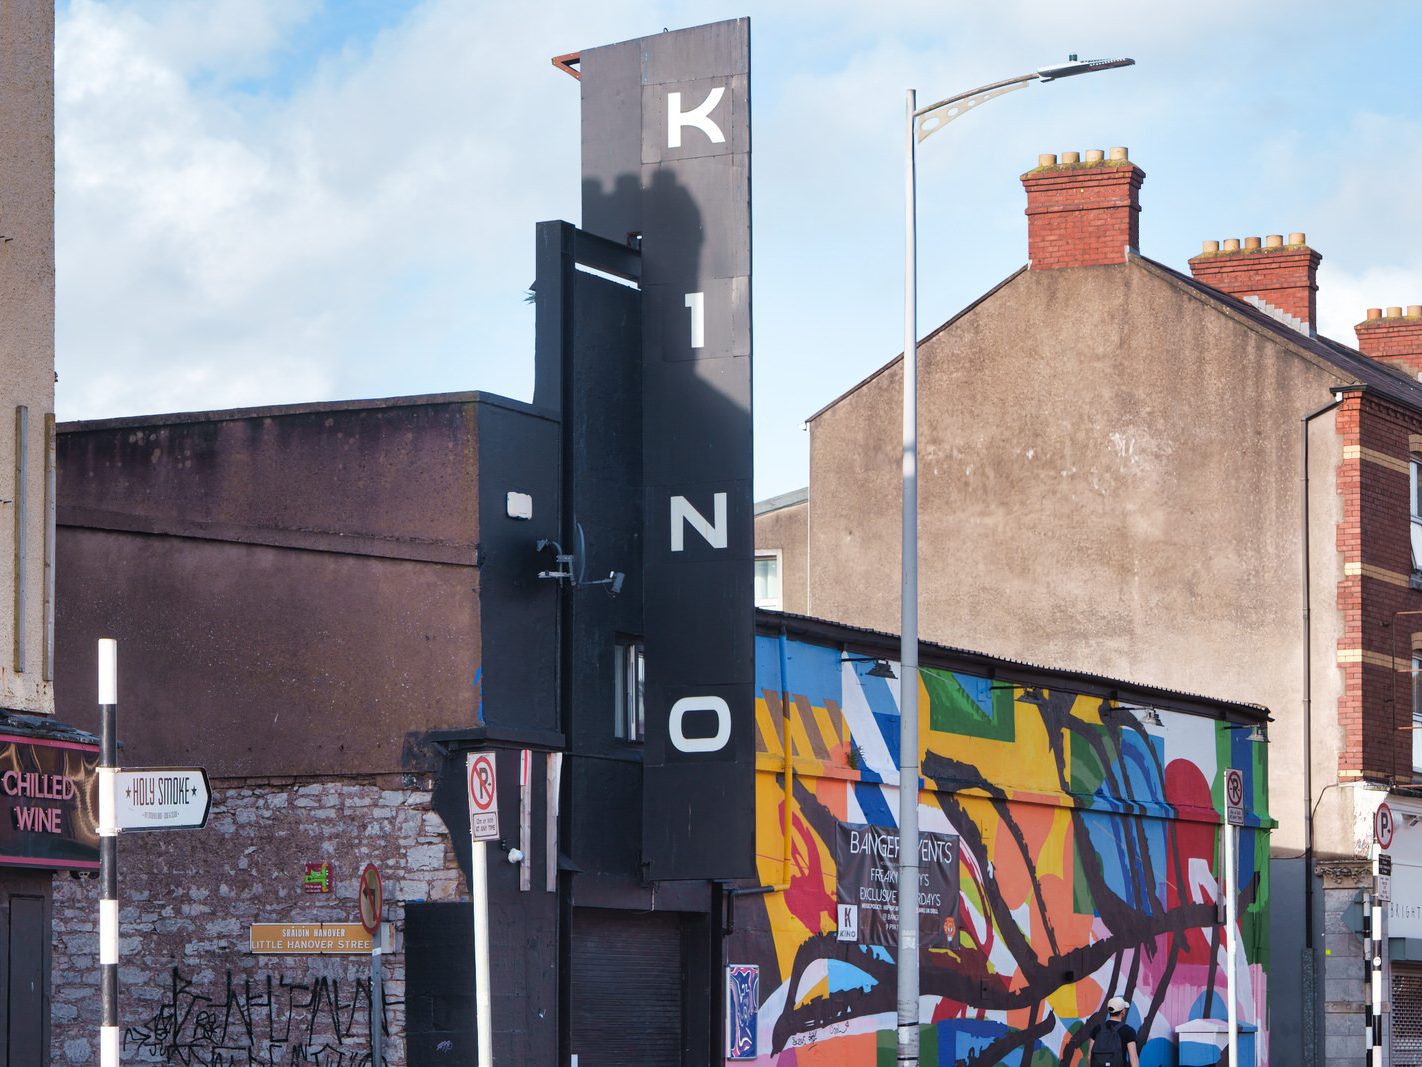 THE KINO [CURRENT MURAL IS NOT AS INTERESTING AS THE JACKIE OH MURAL] 001